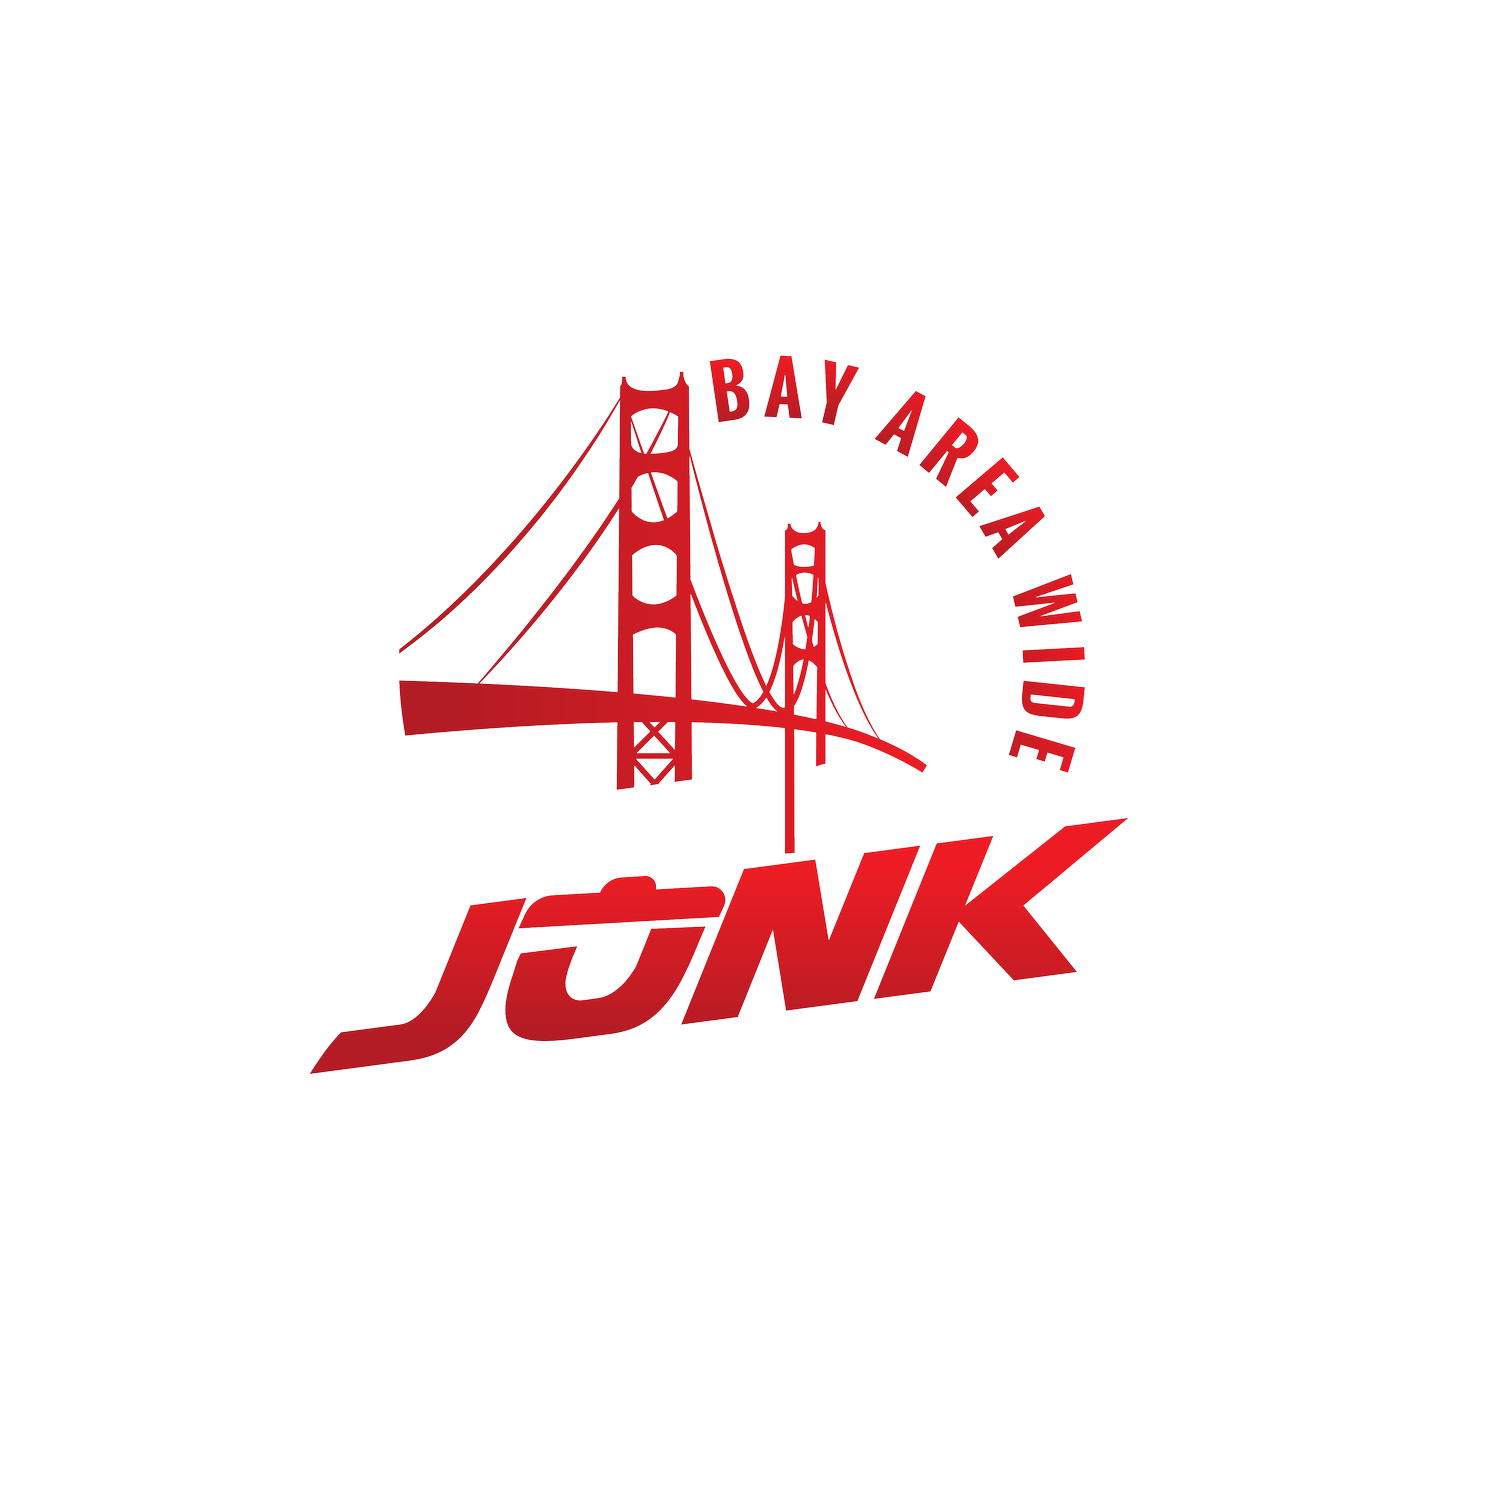 Bay Area Wide Hauling &amp; Junk Removal